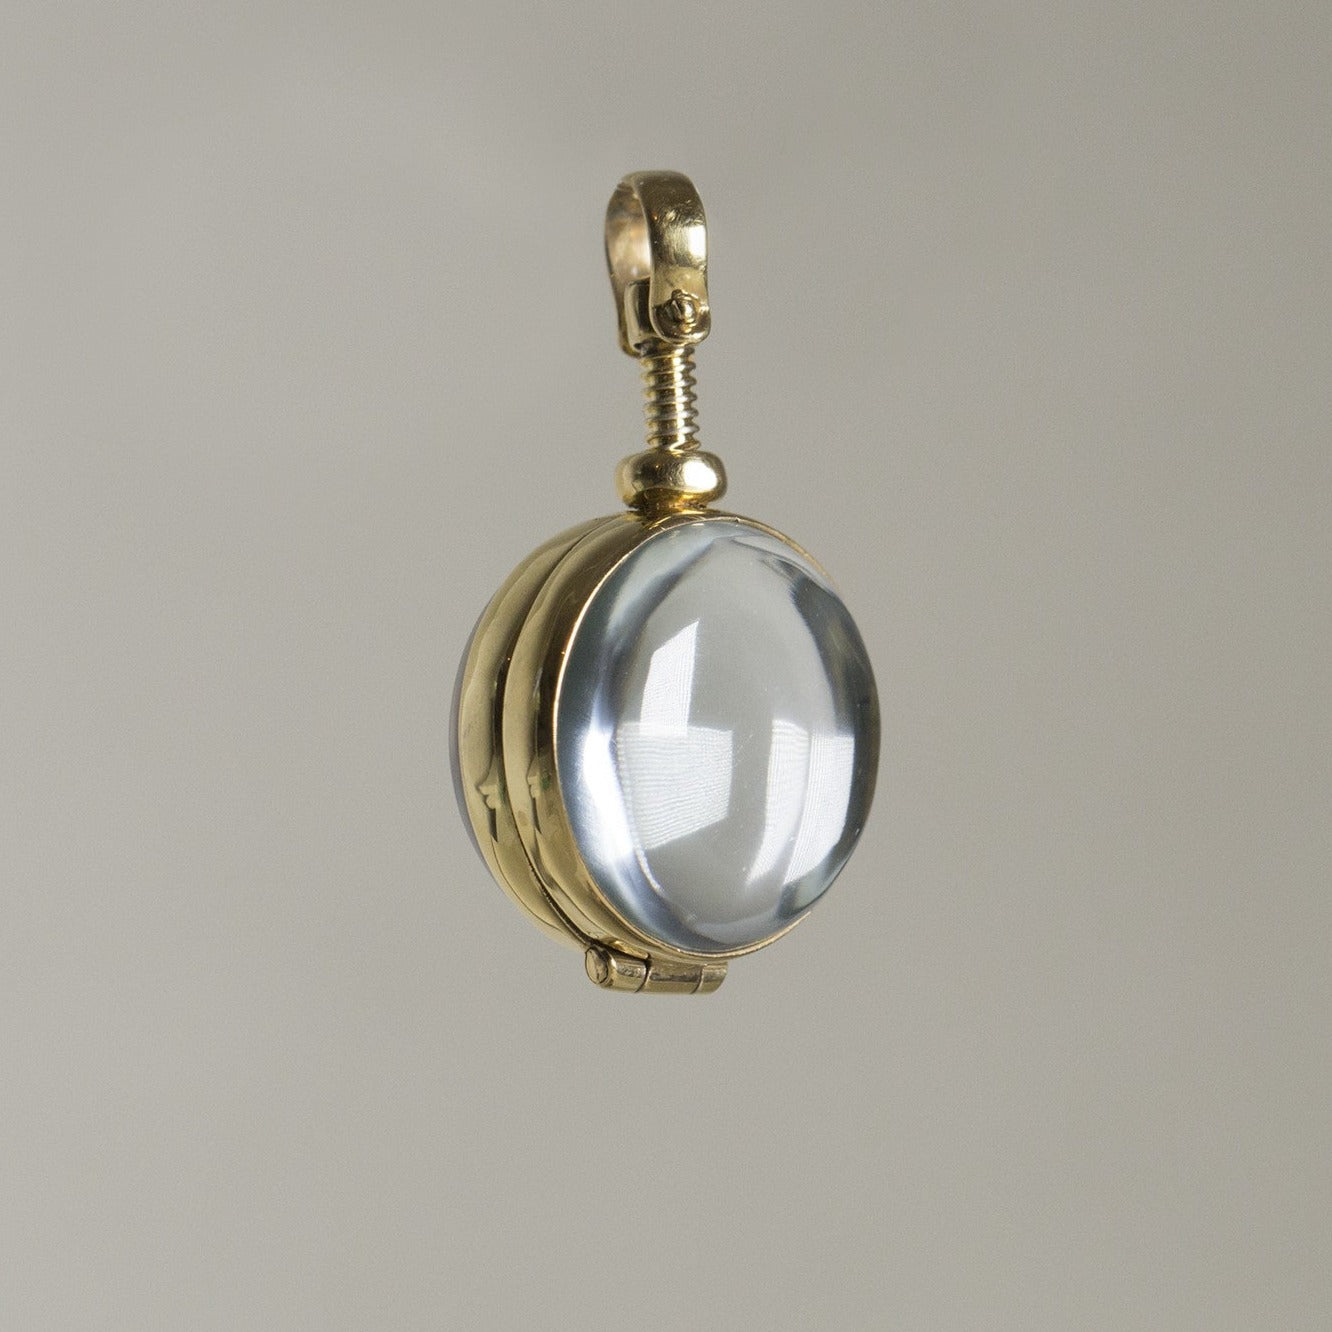 everything about this locket screams gorgeous - the playfulness of the design, the elegant look and its fantastic history 